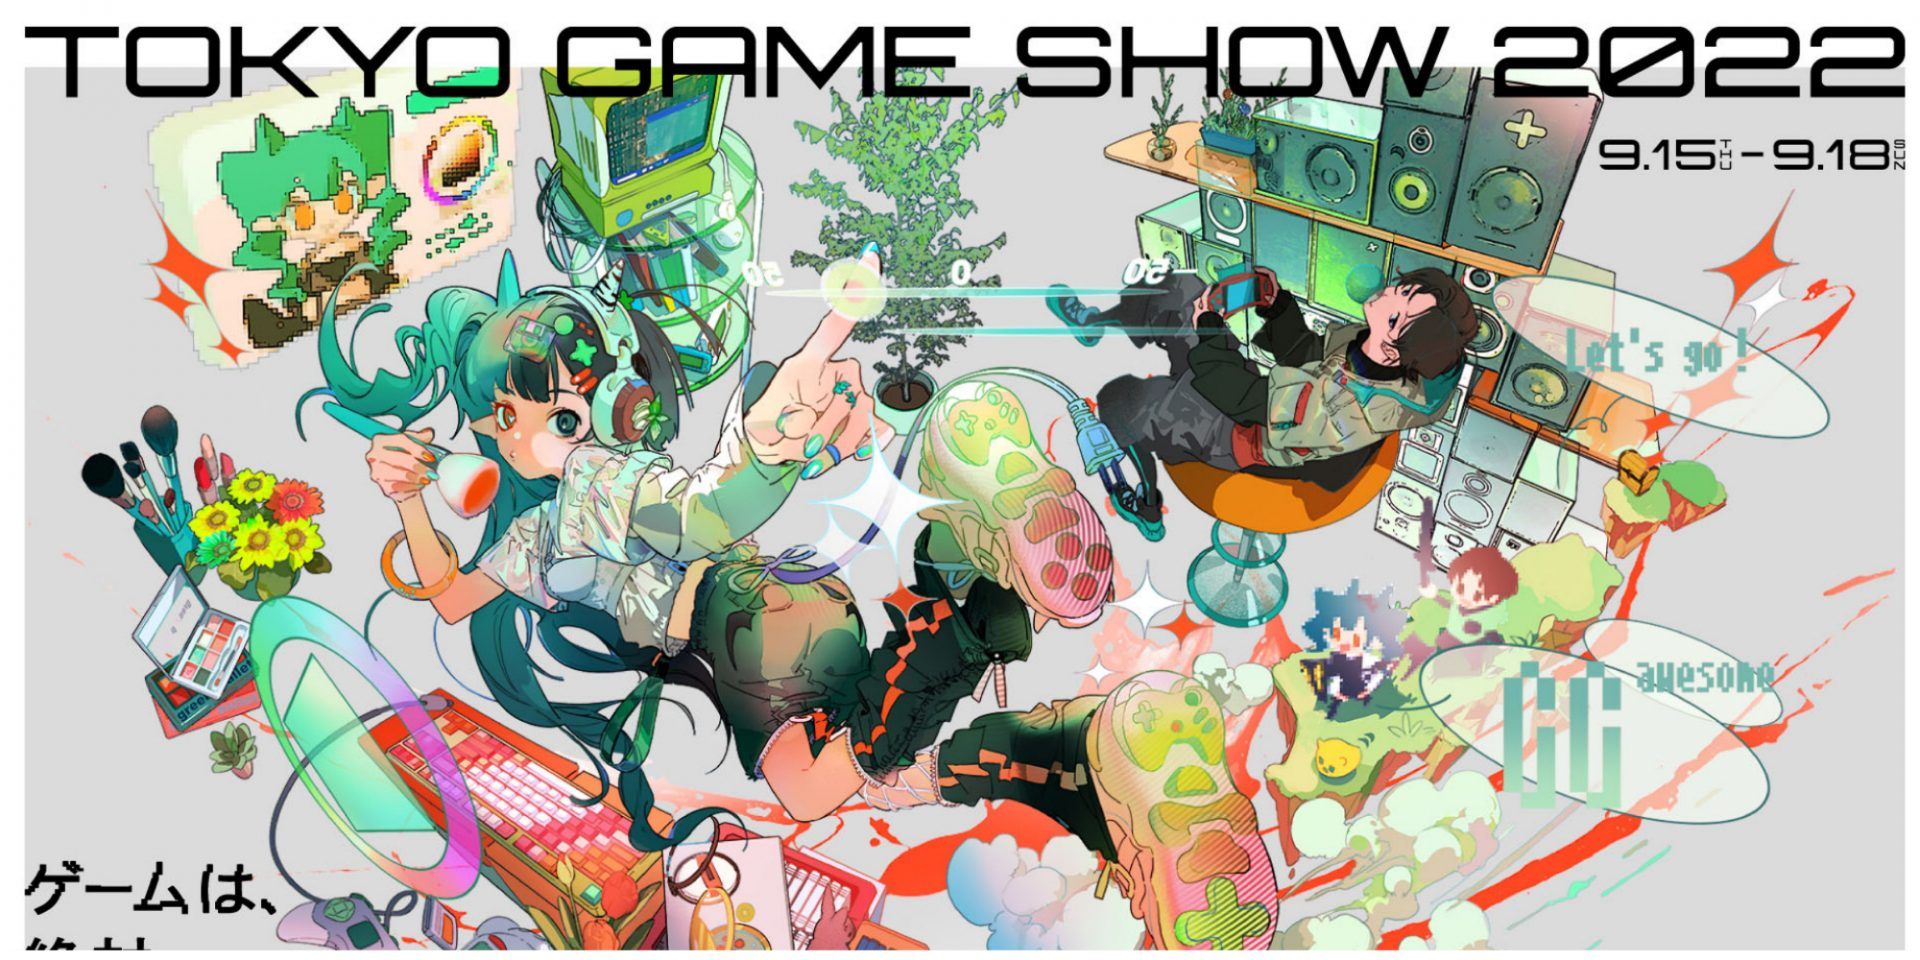 Tokyo Game Show 2022 Official Website and Main Visual Released